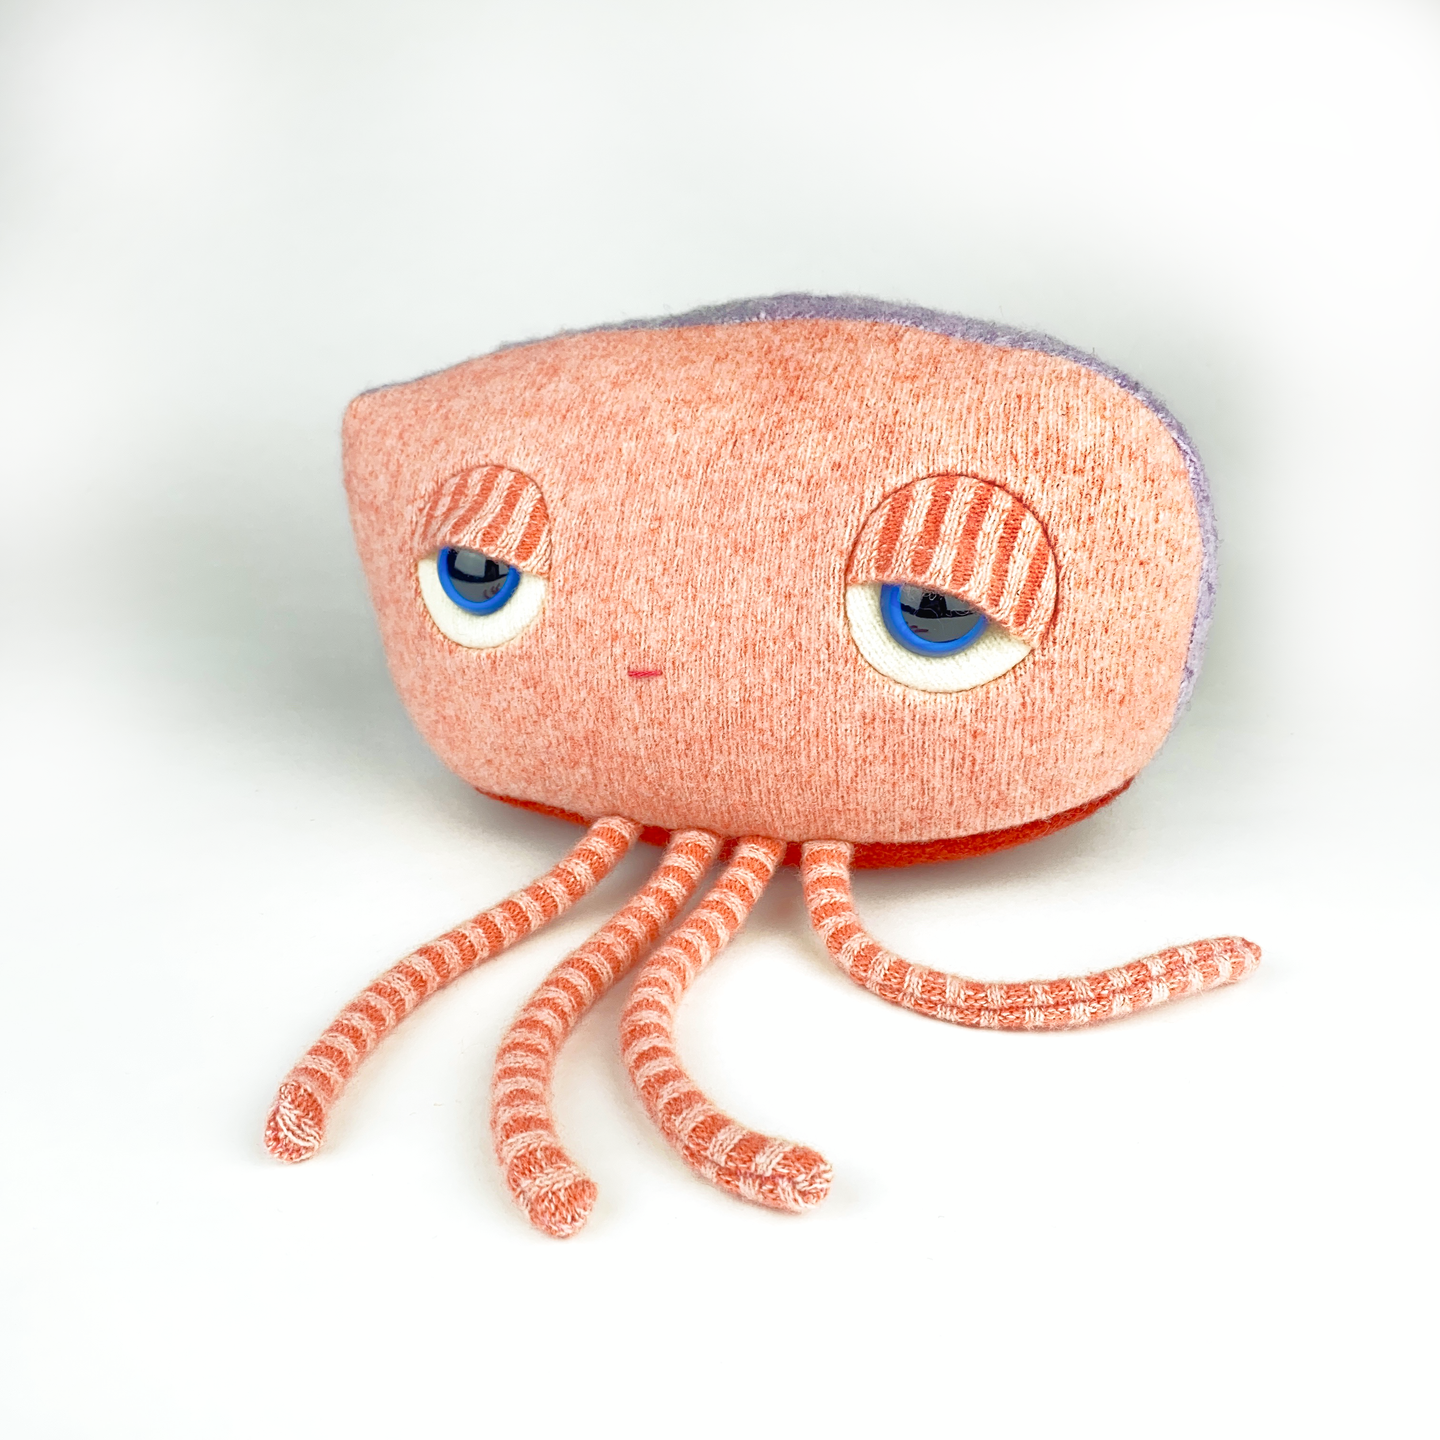 Diane the friendly squid monster plush toy